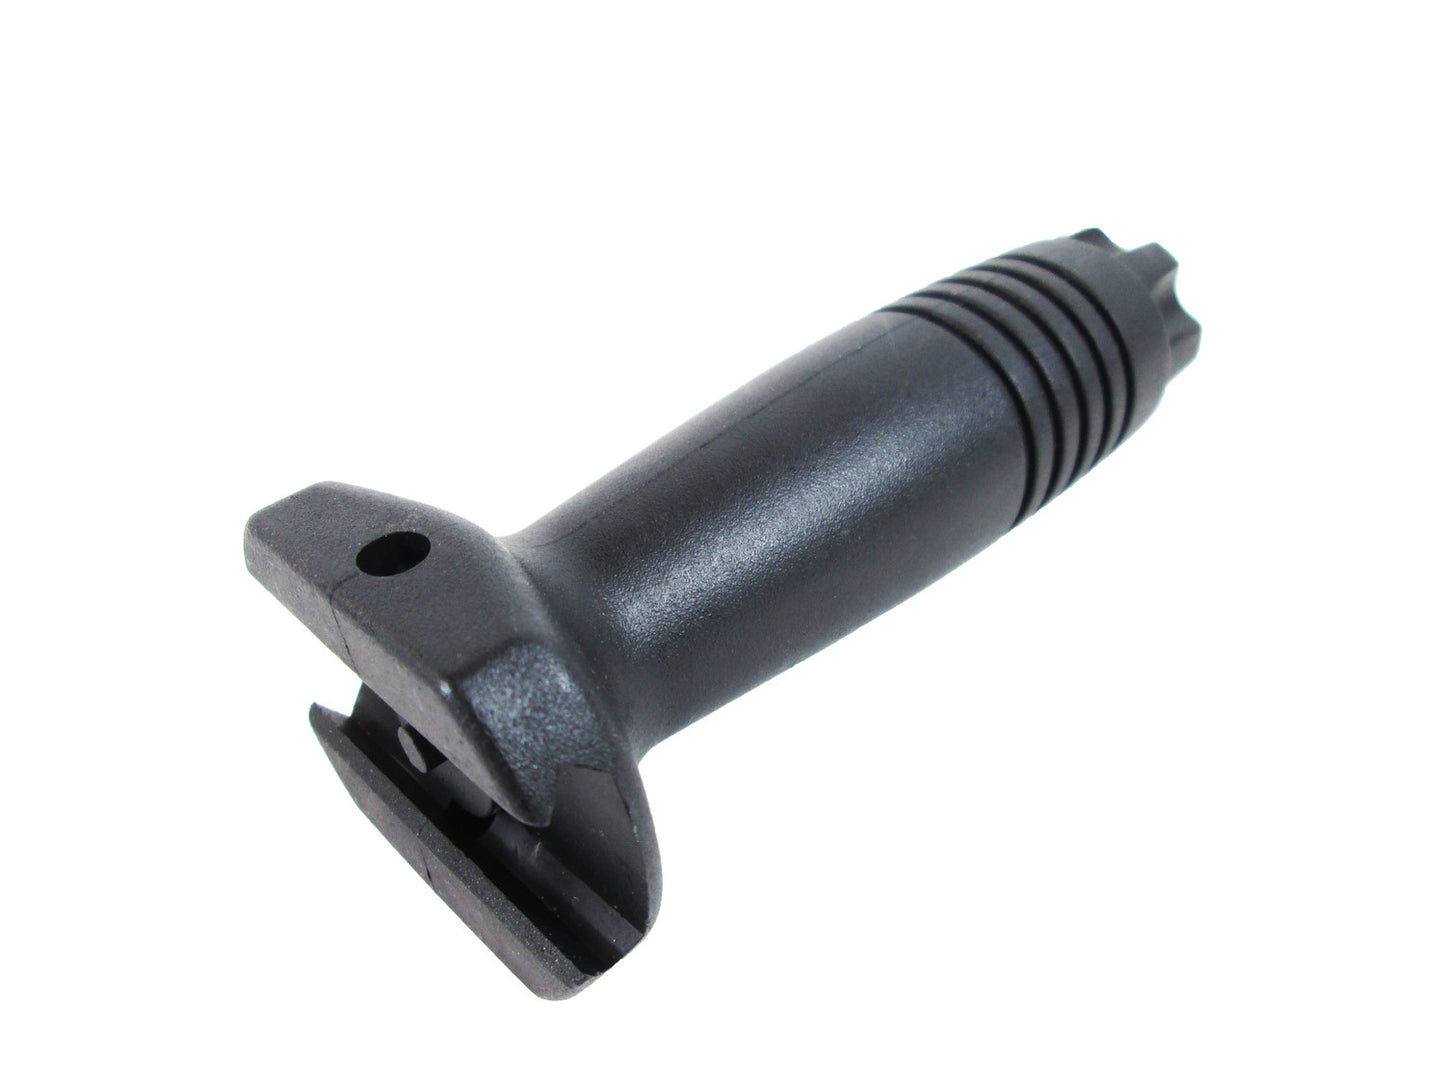 Tactical 20mm Weaver Rail Foregrip Attachment